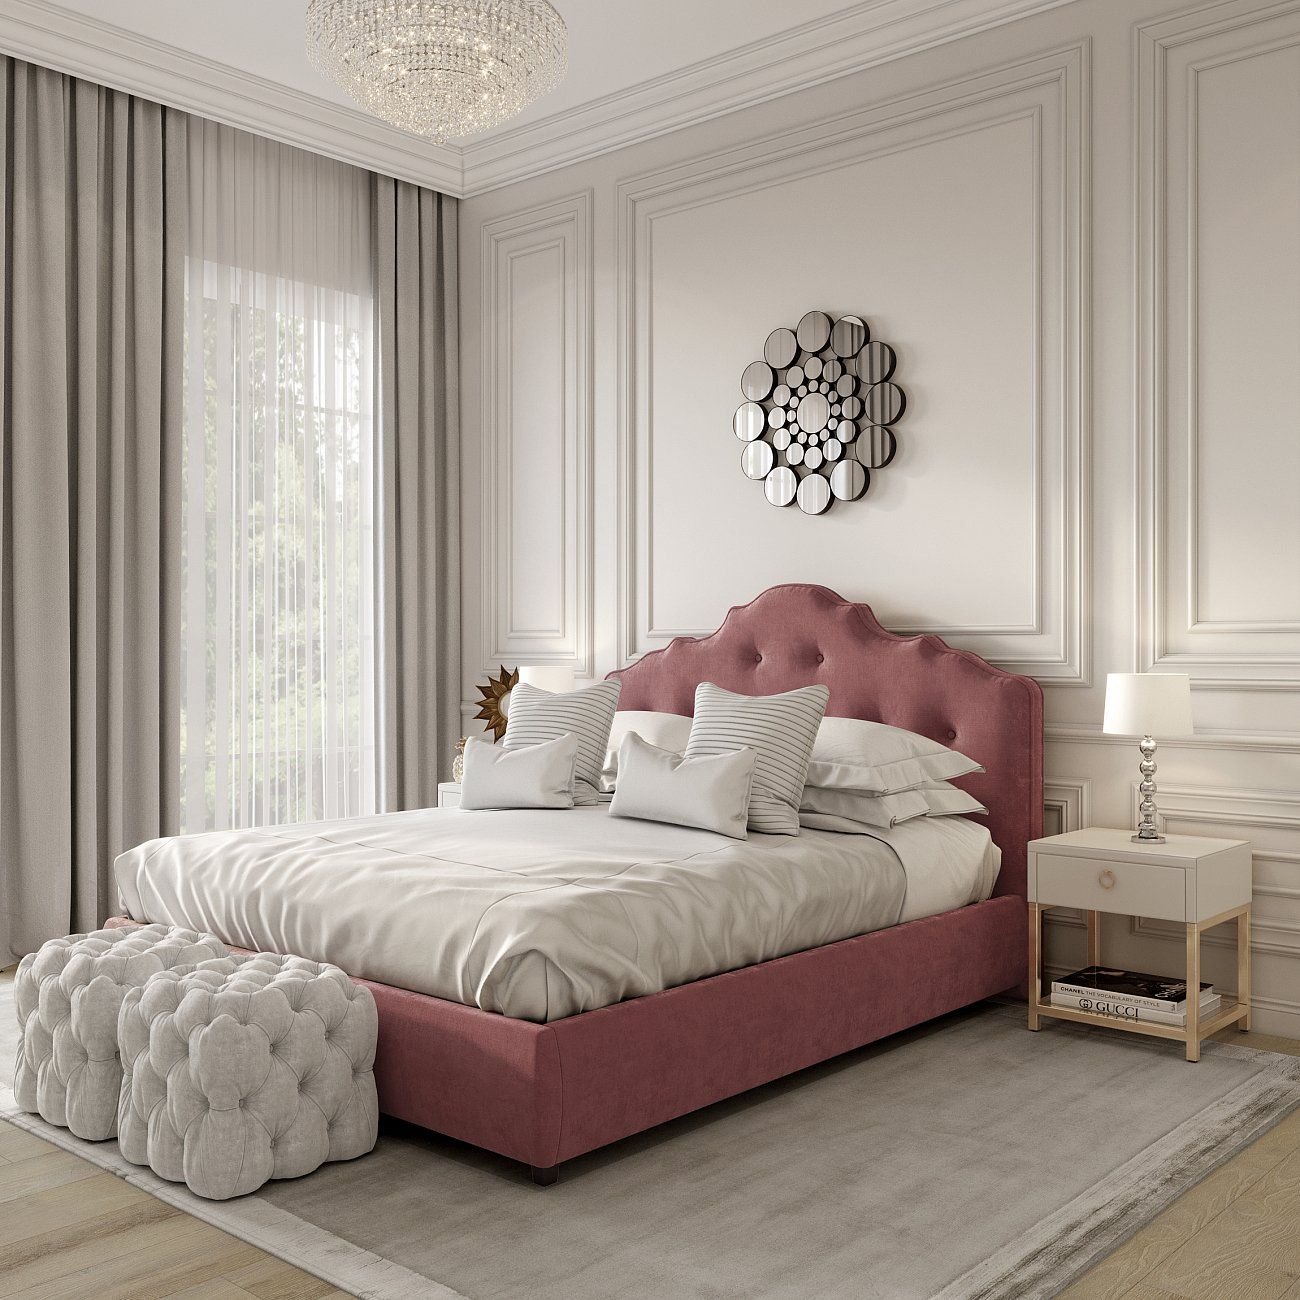 Double bed 160x200 cm red Palace